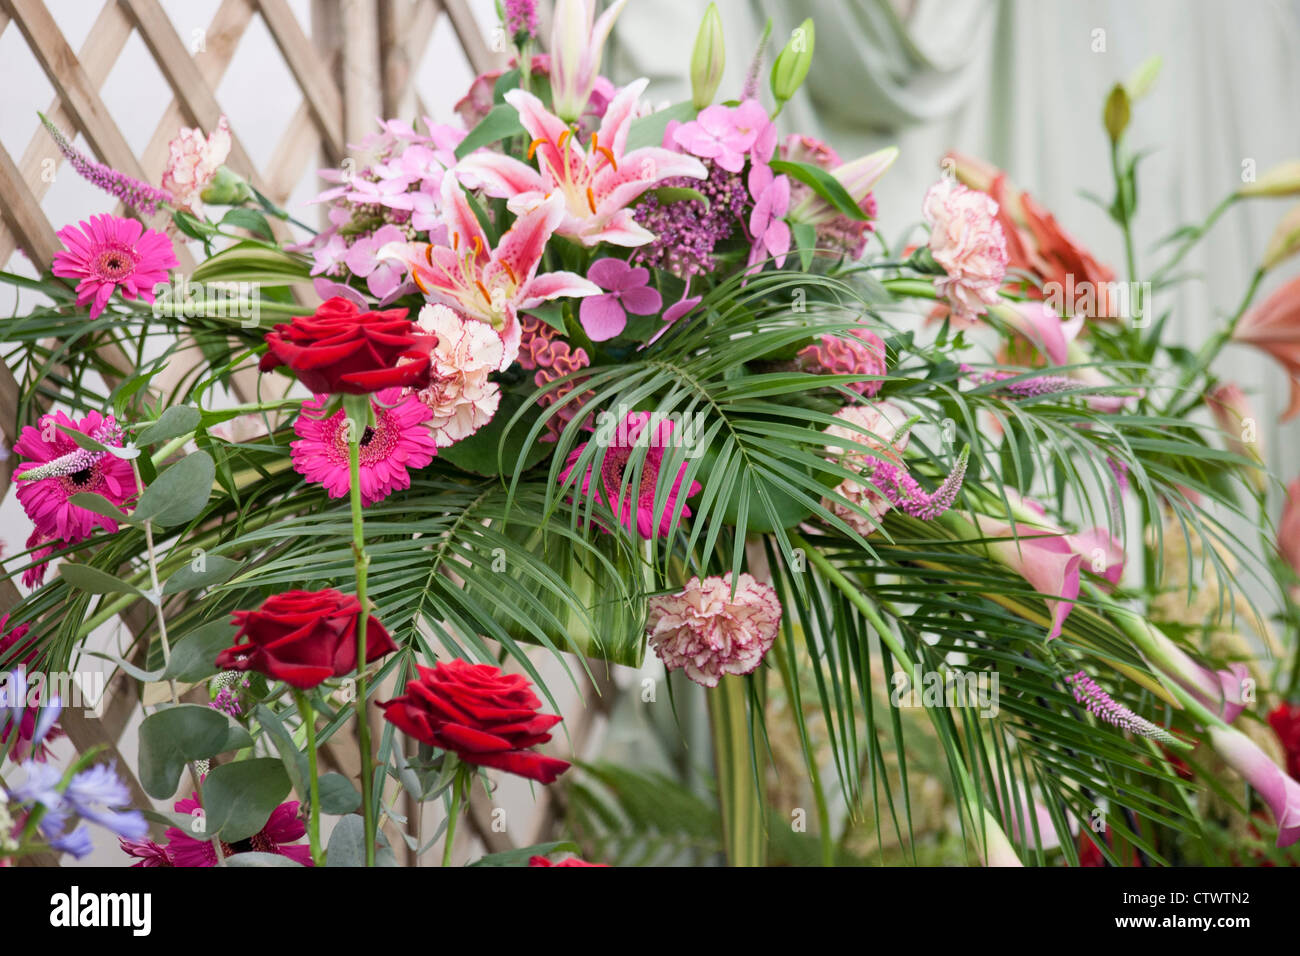 a floral display using roses,gerbera,lilies,palm leaves,hebe,hydrangea and a callo lily Stock Photo